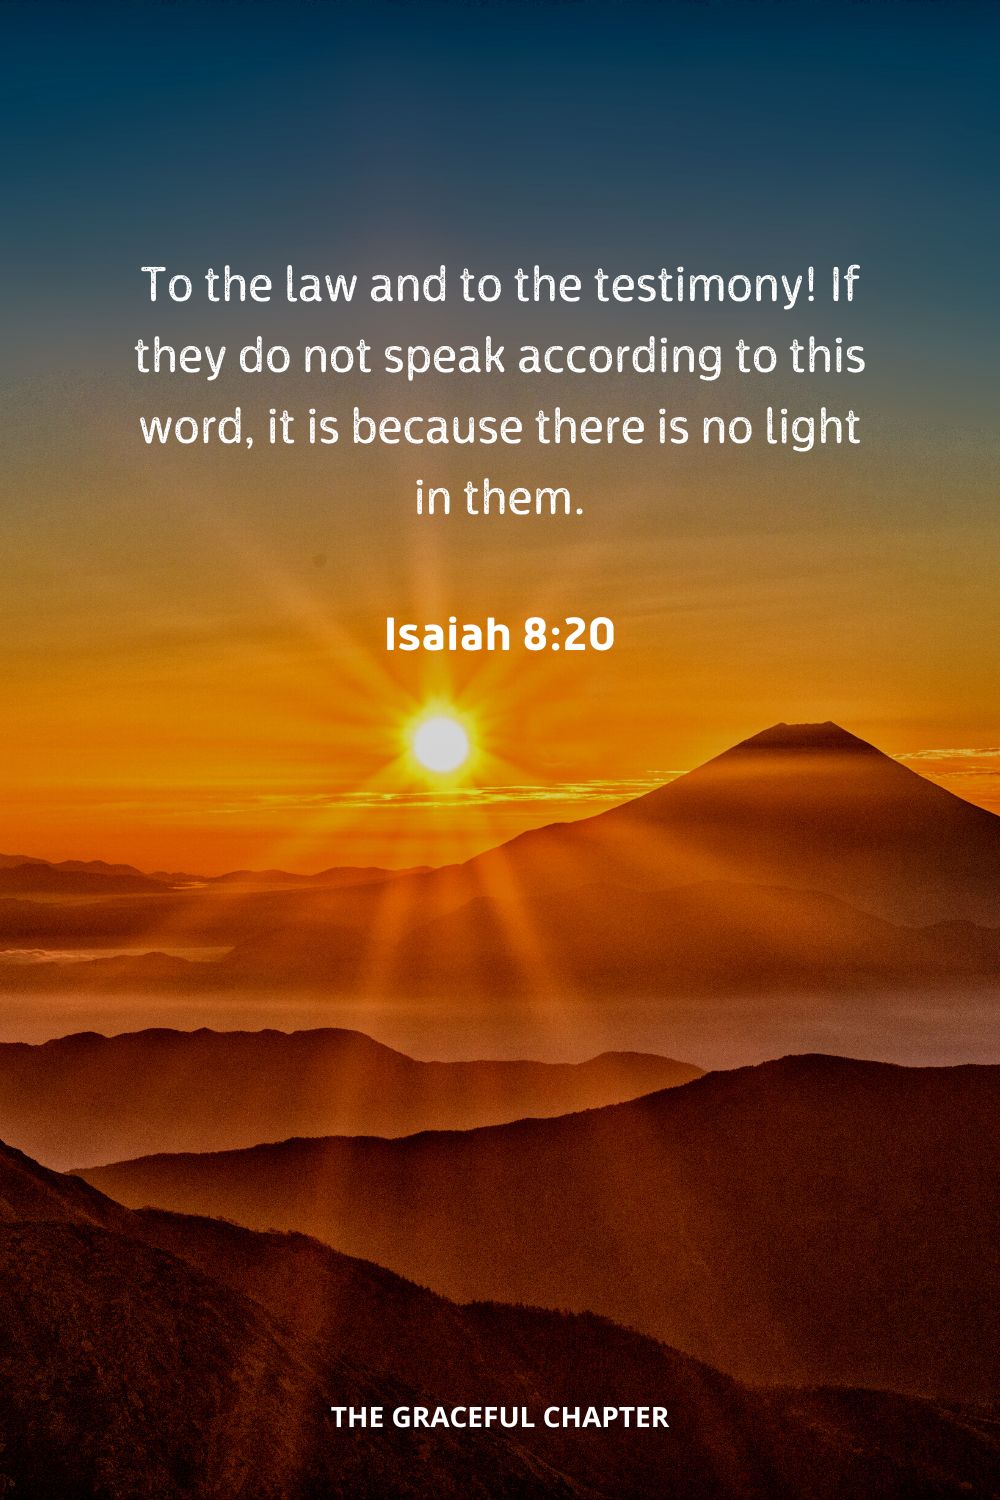 To the law and to the testimony! If they do not speak according to this word, it is because there is no light in them.